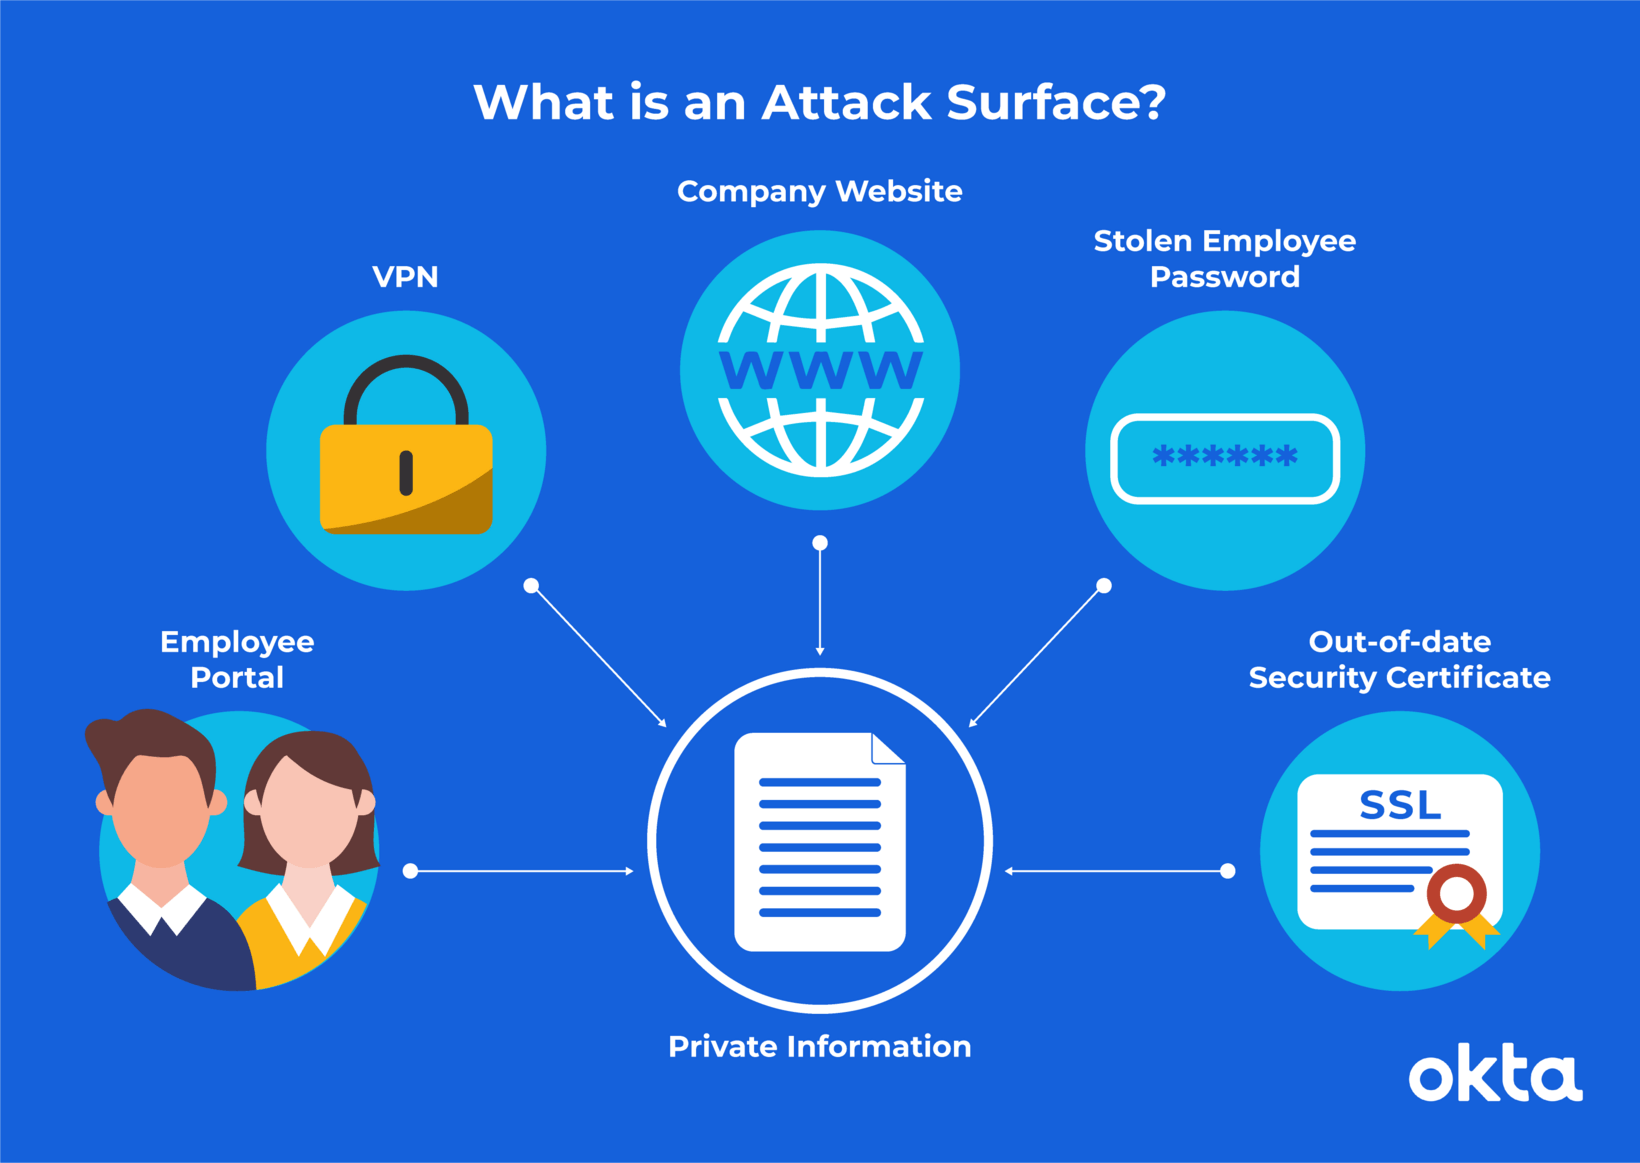 Why Now? The Rise of Attack Surface Management